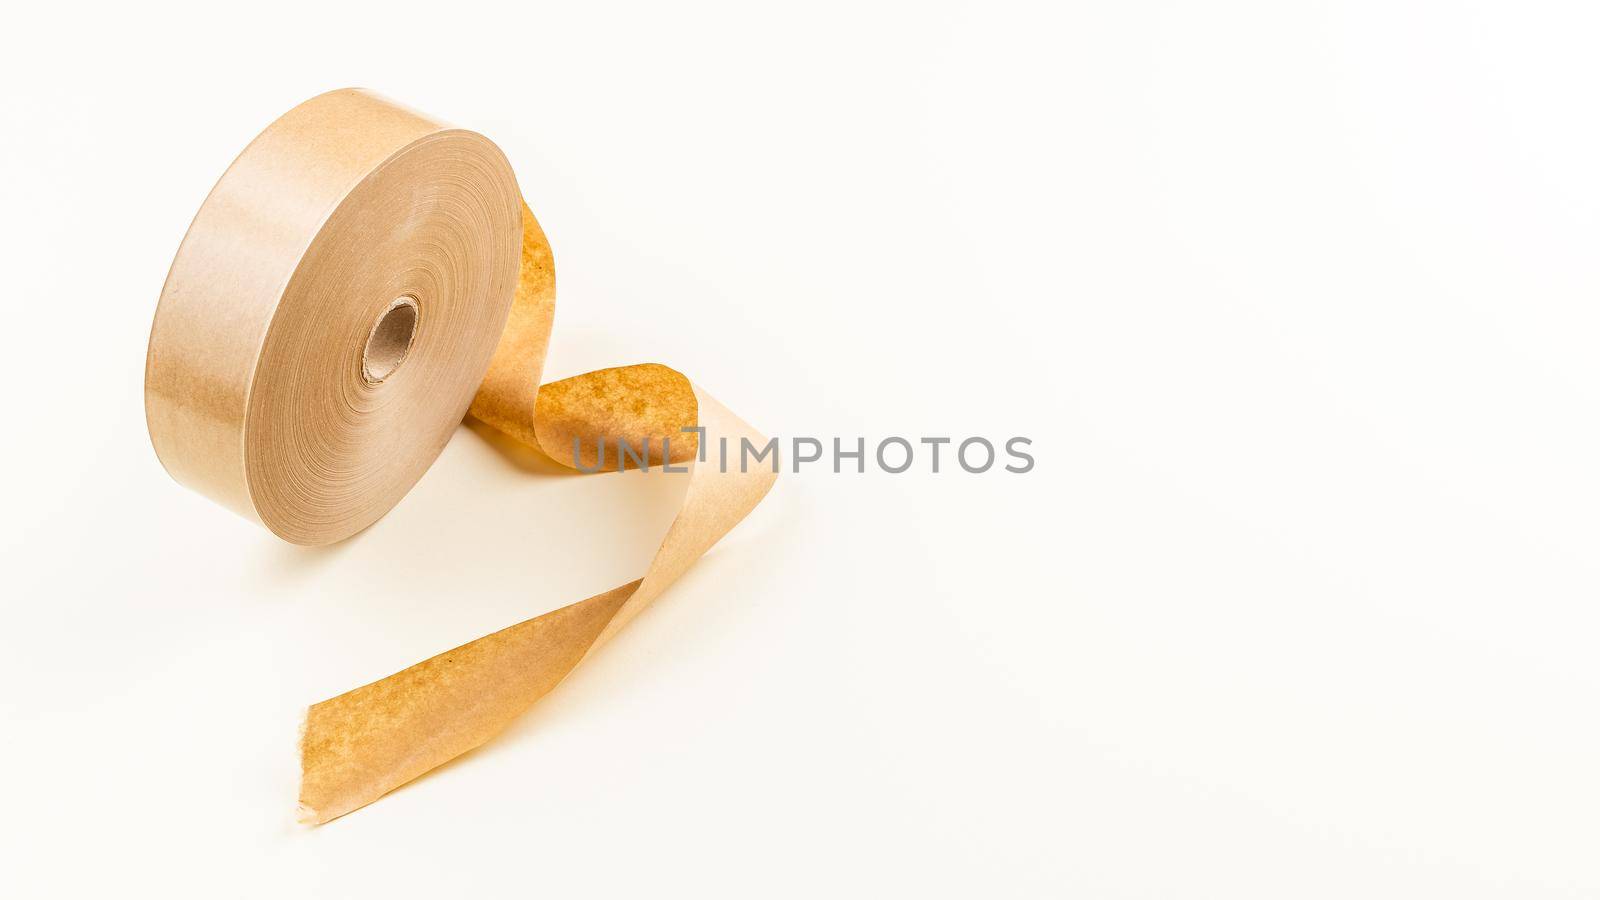 Roll of biodegradable paper sticky tape for delivery service packaging